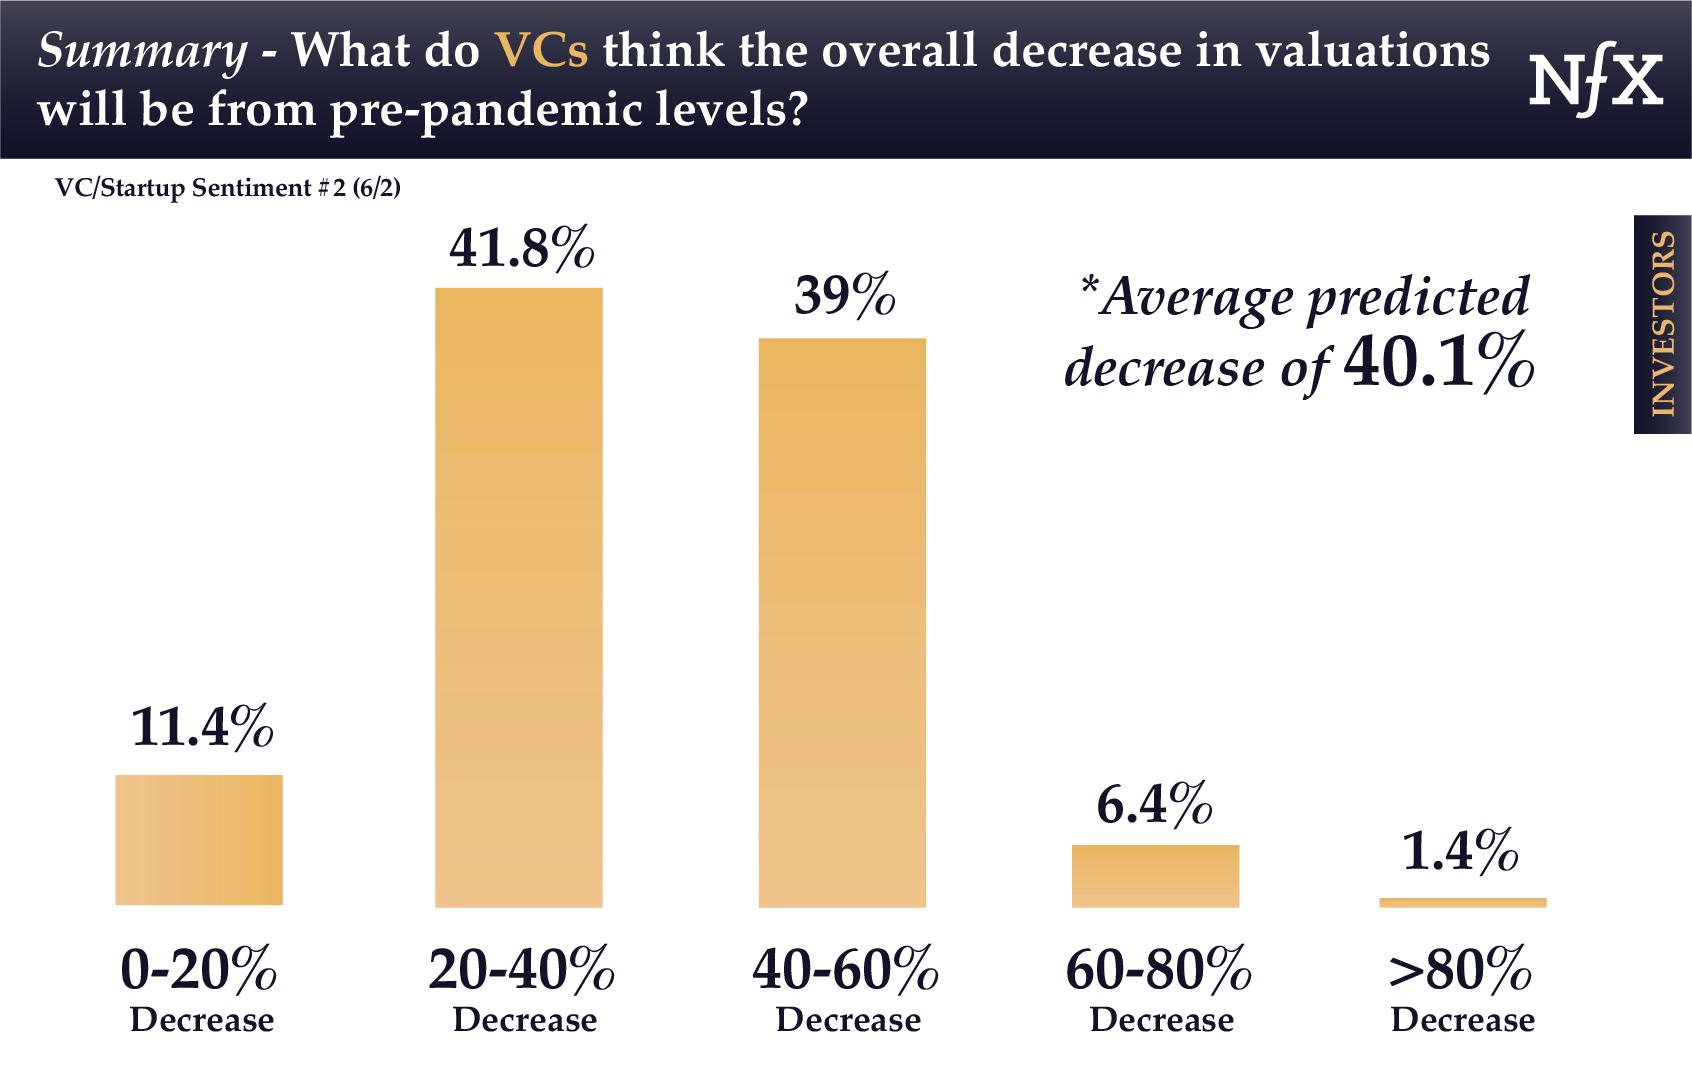 VCs - Overall Valuations Decrease